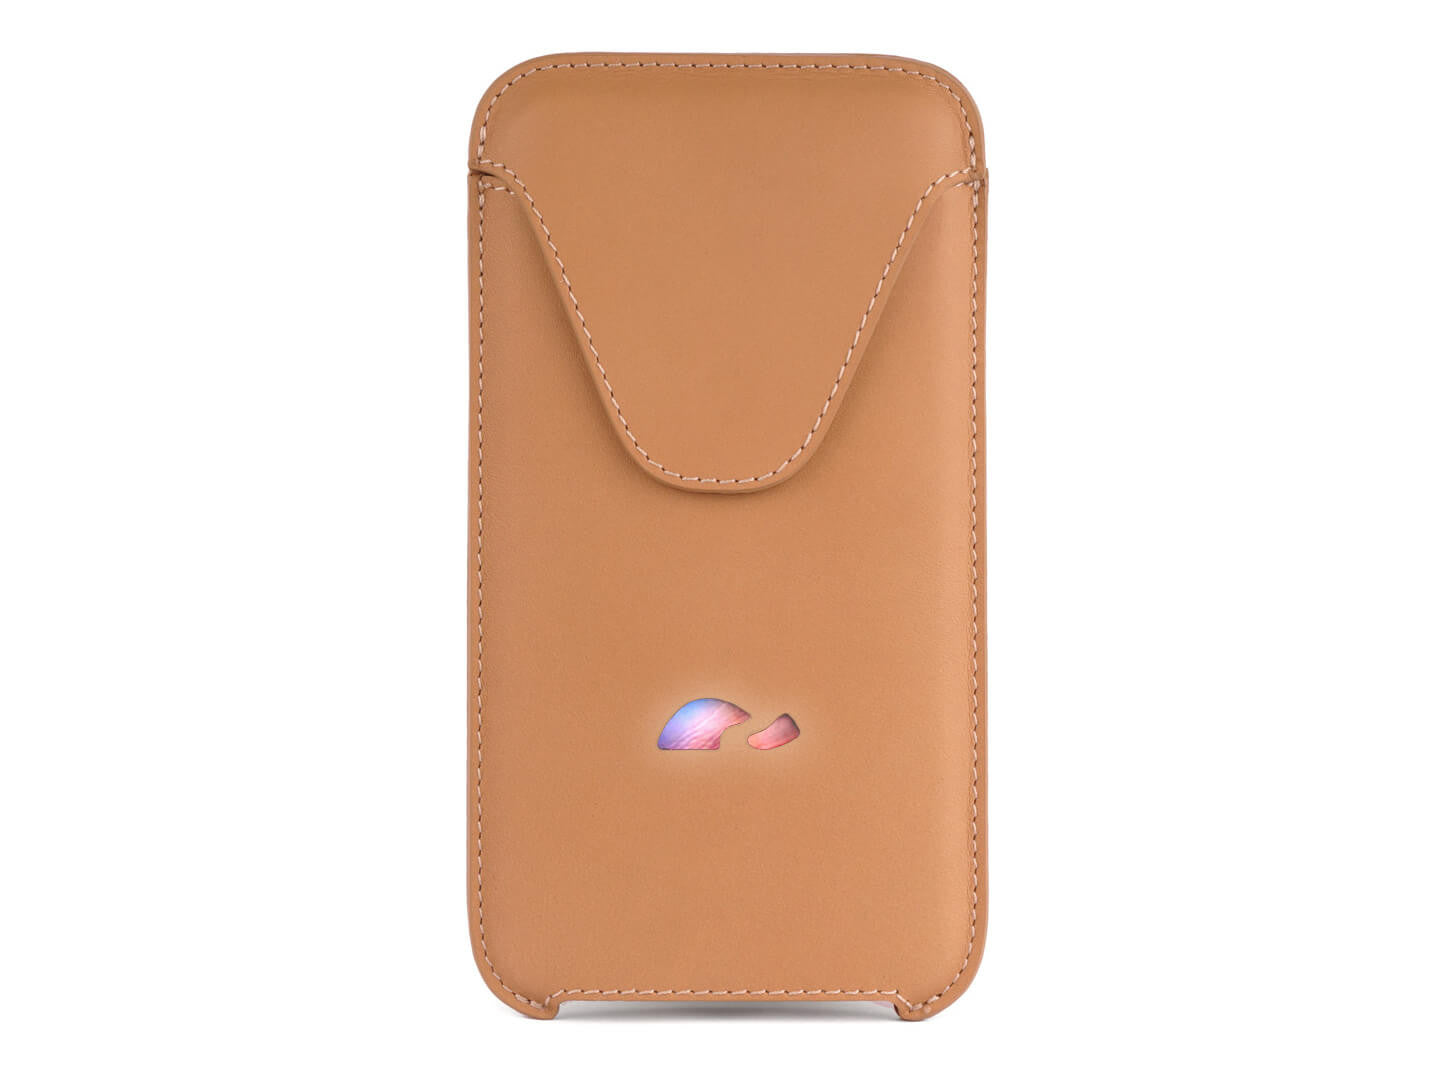 iPhone 6/7/8 Plus Leather pouch - slim sleeve case - camel - Carapaz